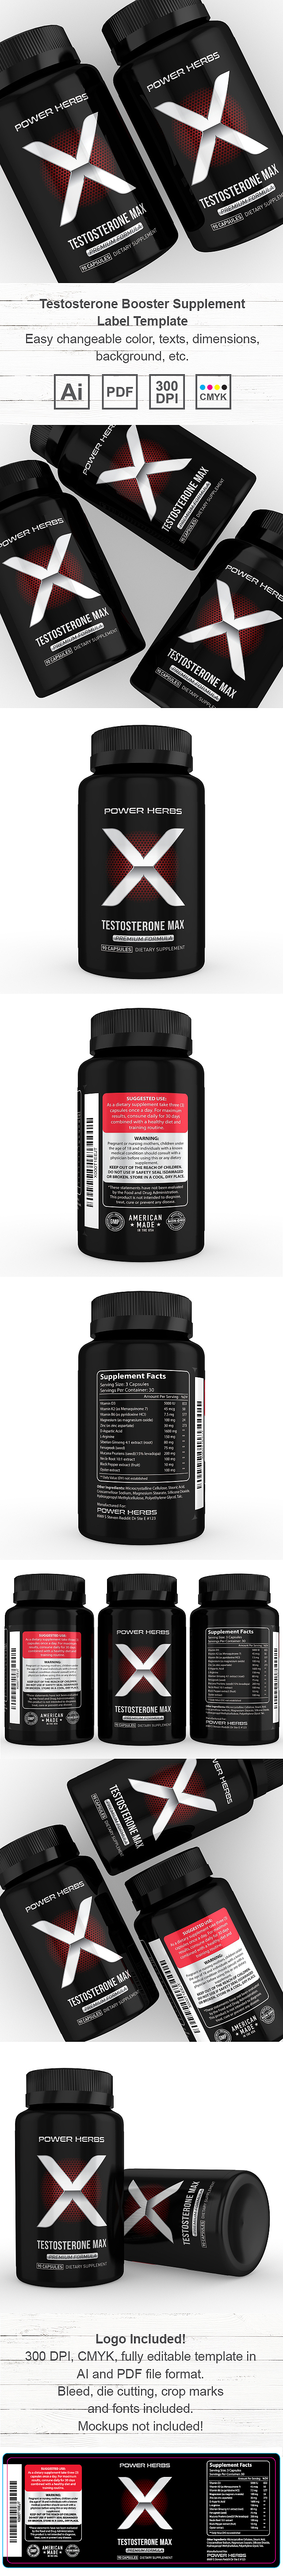 Testosterone Booster Supplement Label Template